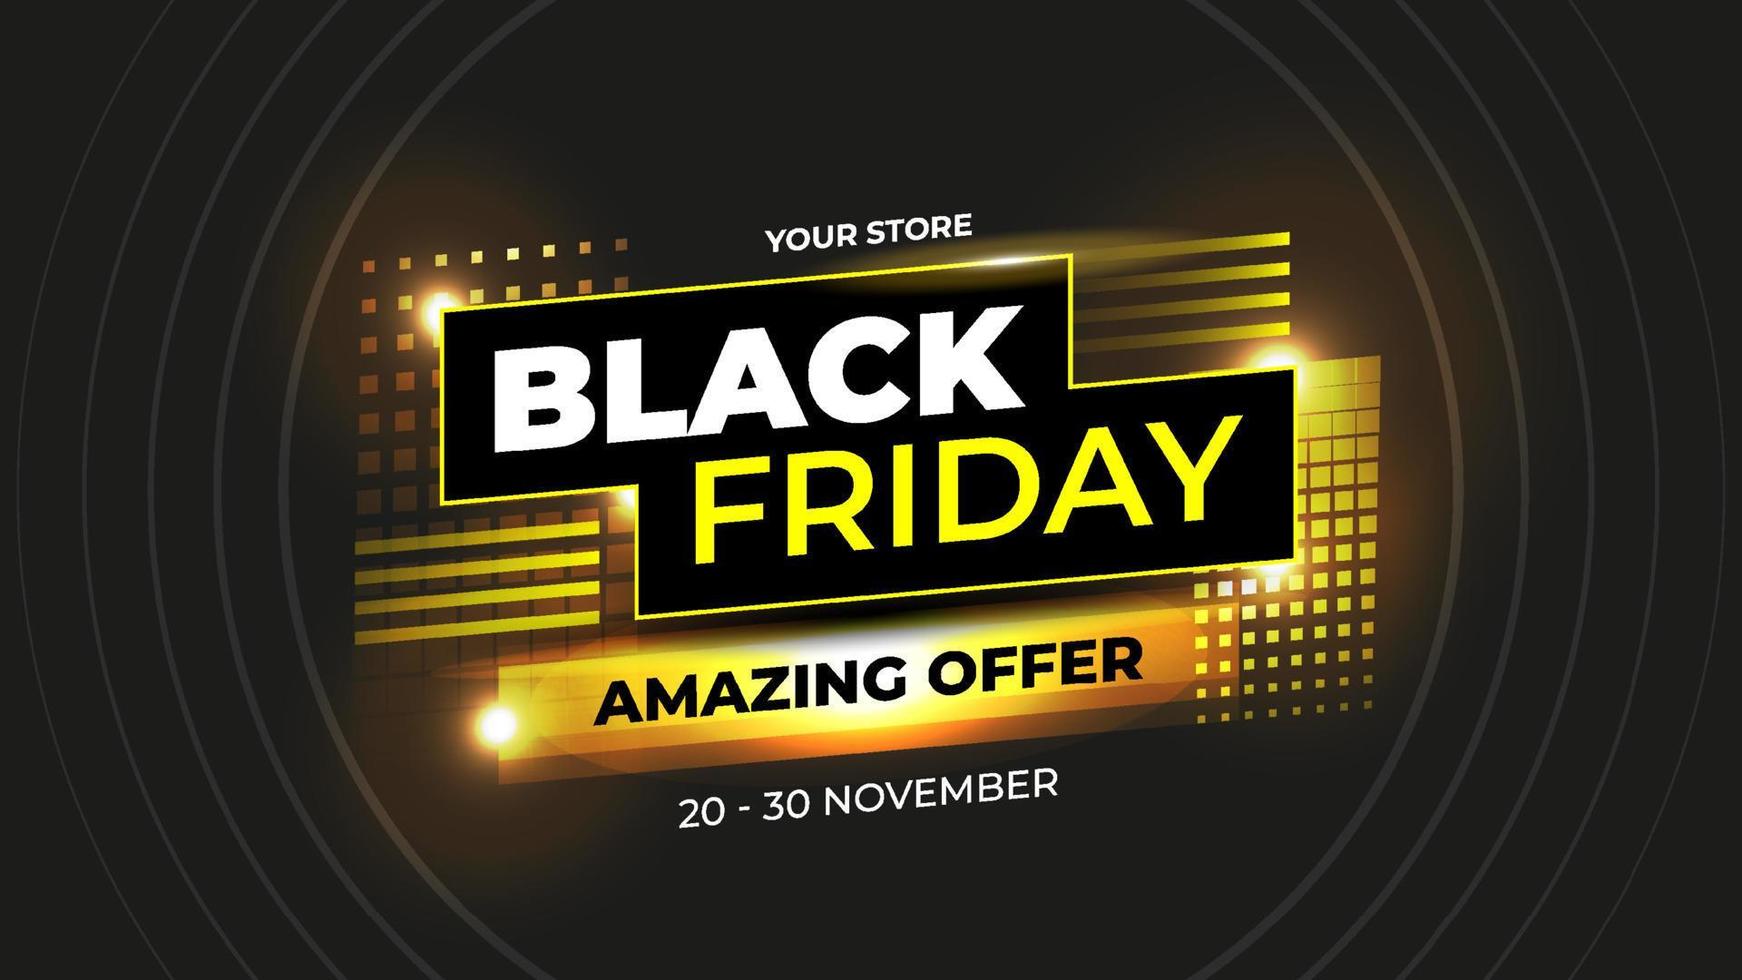 Black Friday Amazing Offer with Yellow Abstract Concept vector